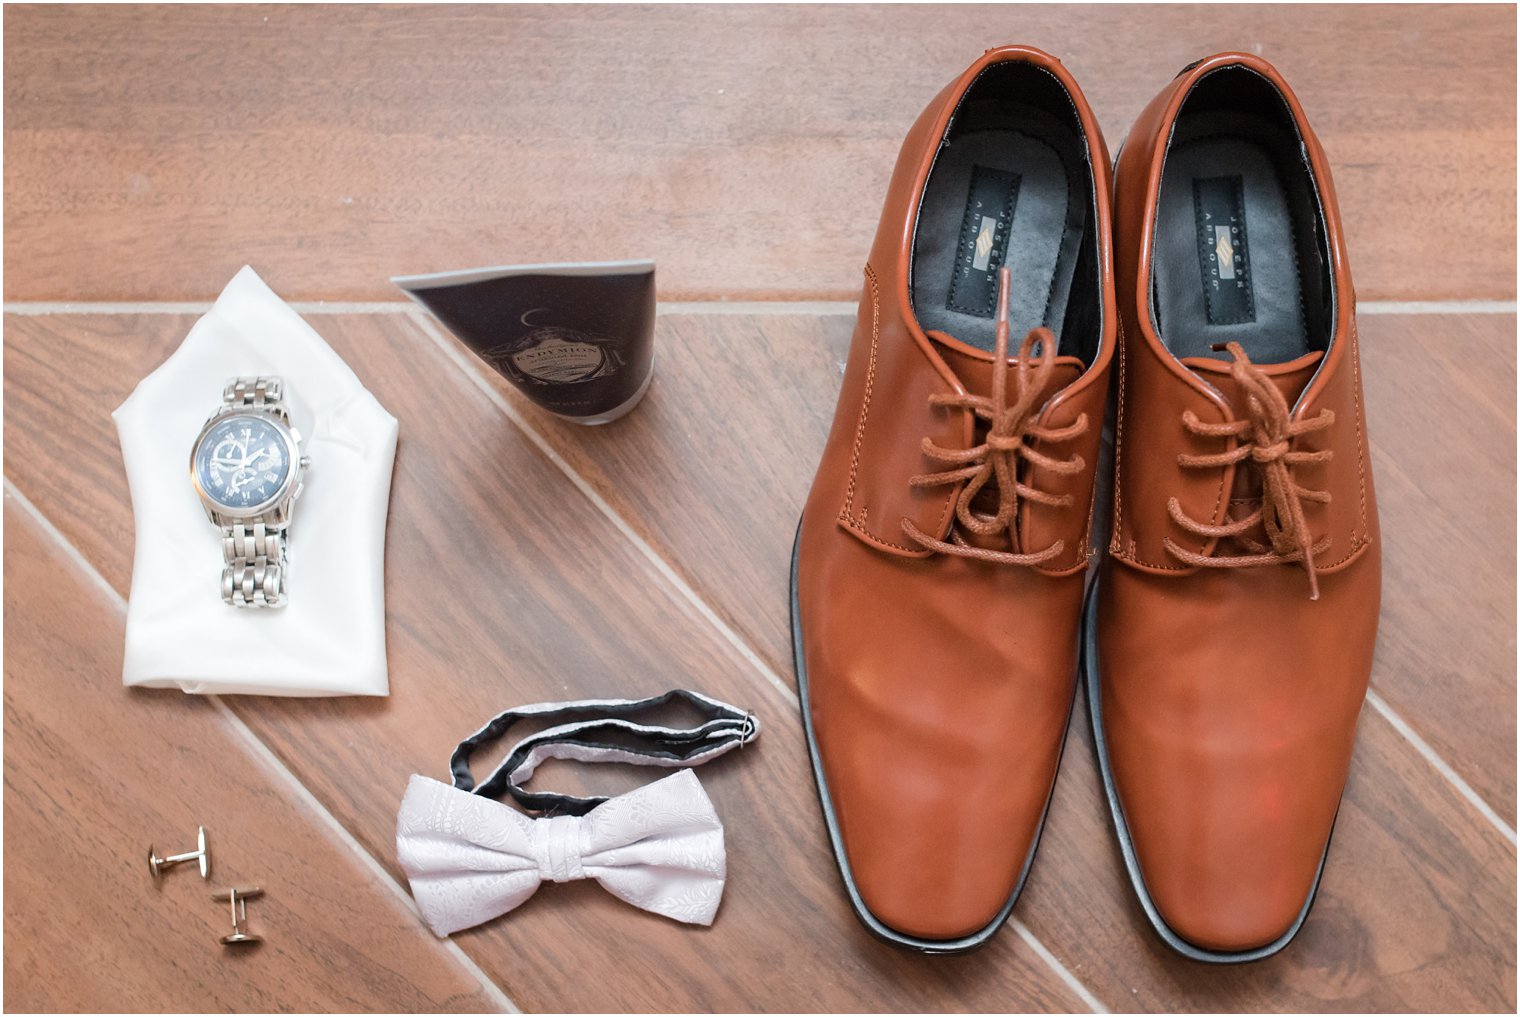 Groom's watch, tie, and shoes from Men's Wearhouse